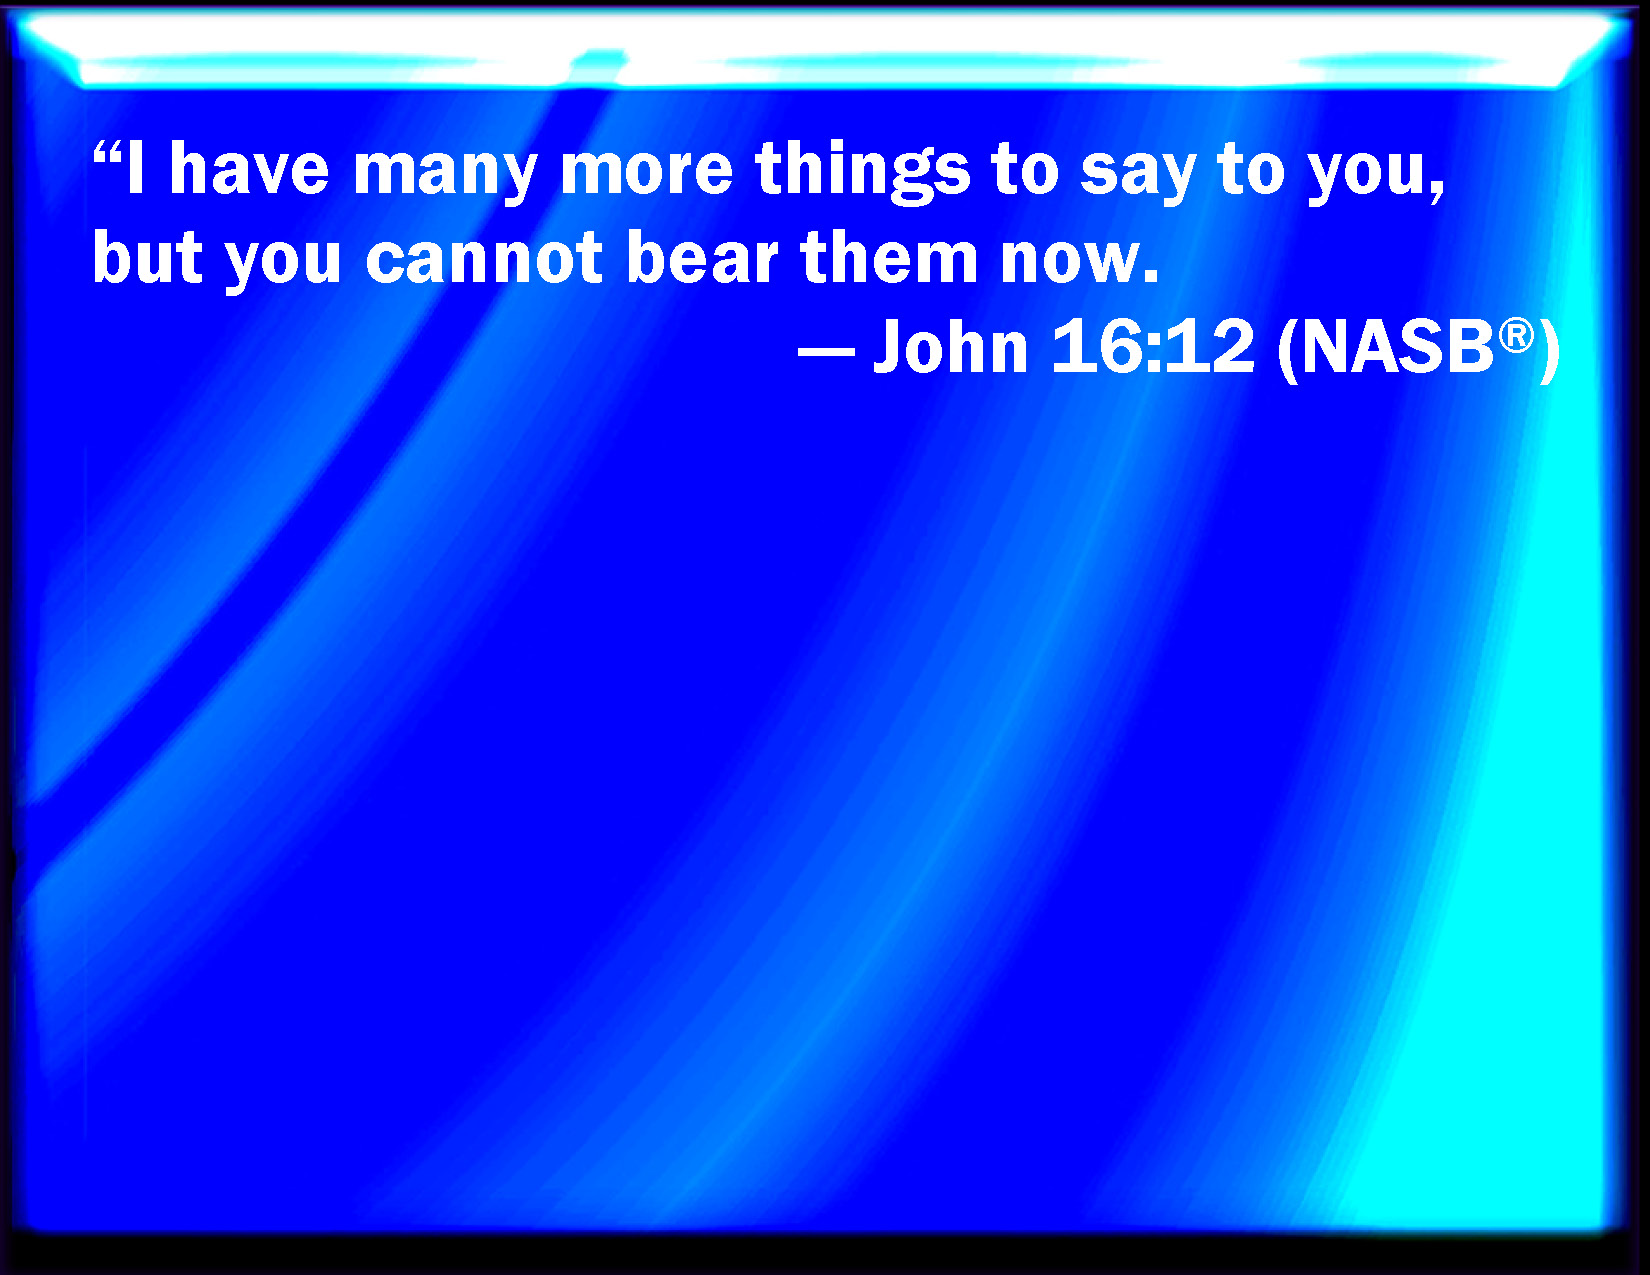 John 1612 I have yet many things to say to you, but you cannot bear